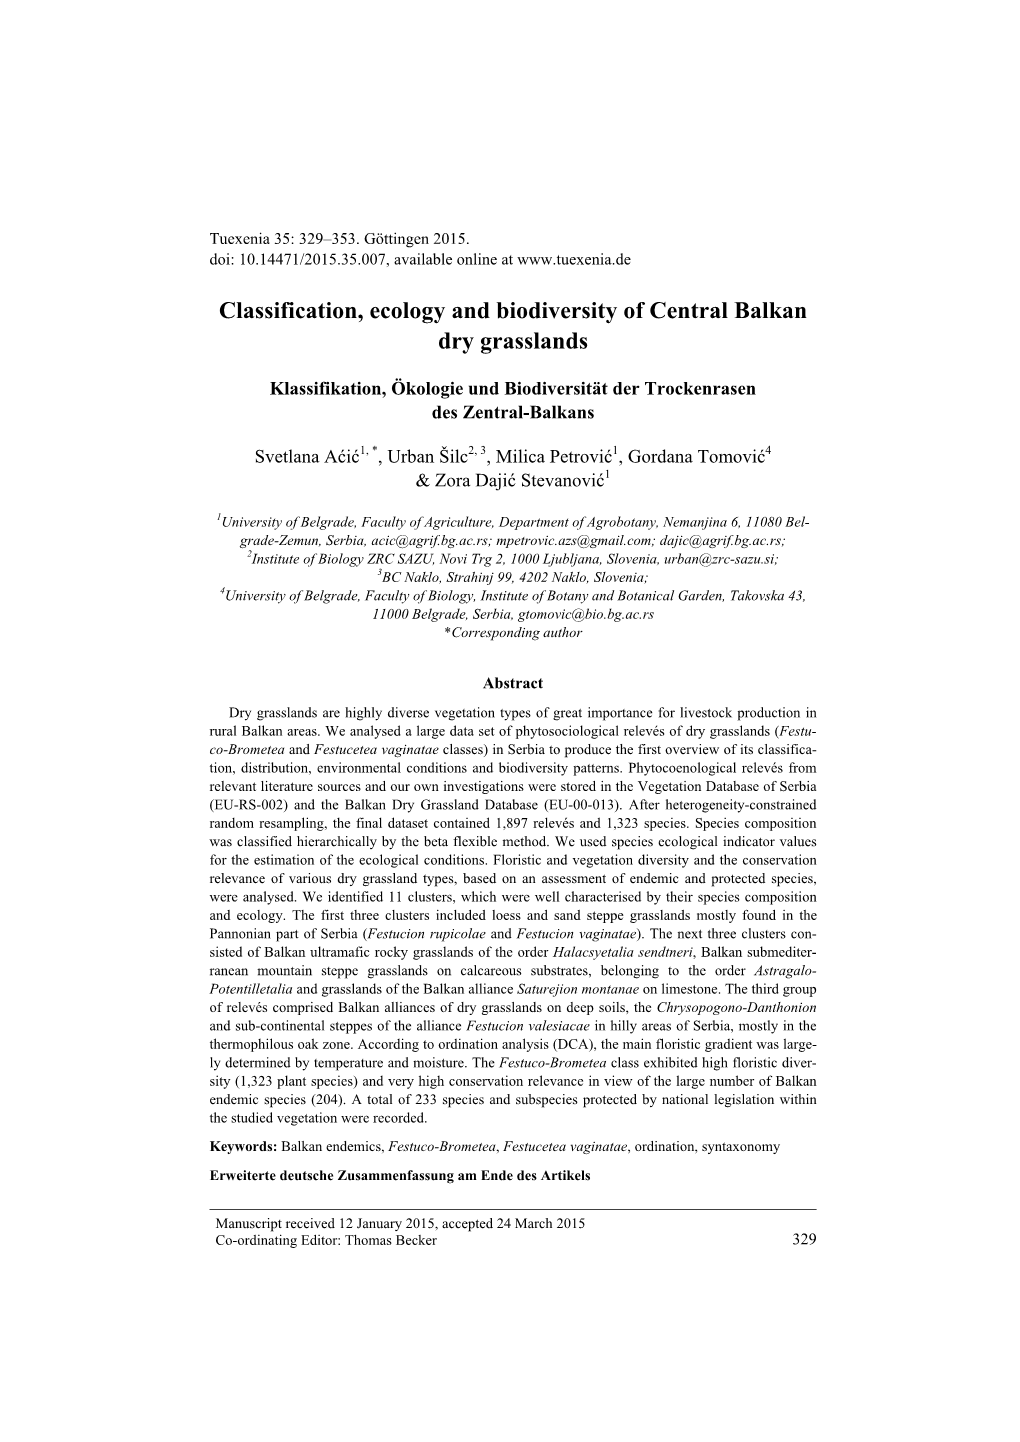 Classification, Ecology and Biodiversity of Central Bal-Kan Dry Grasslands